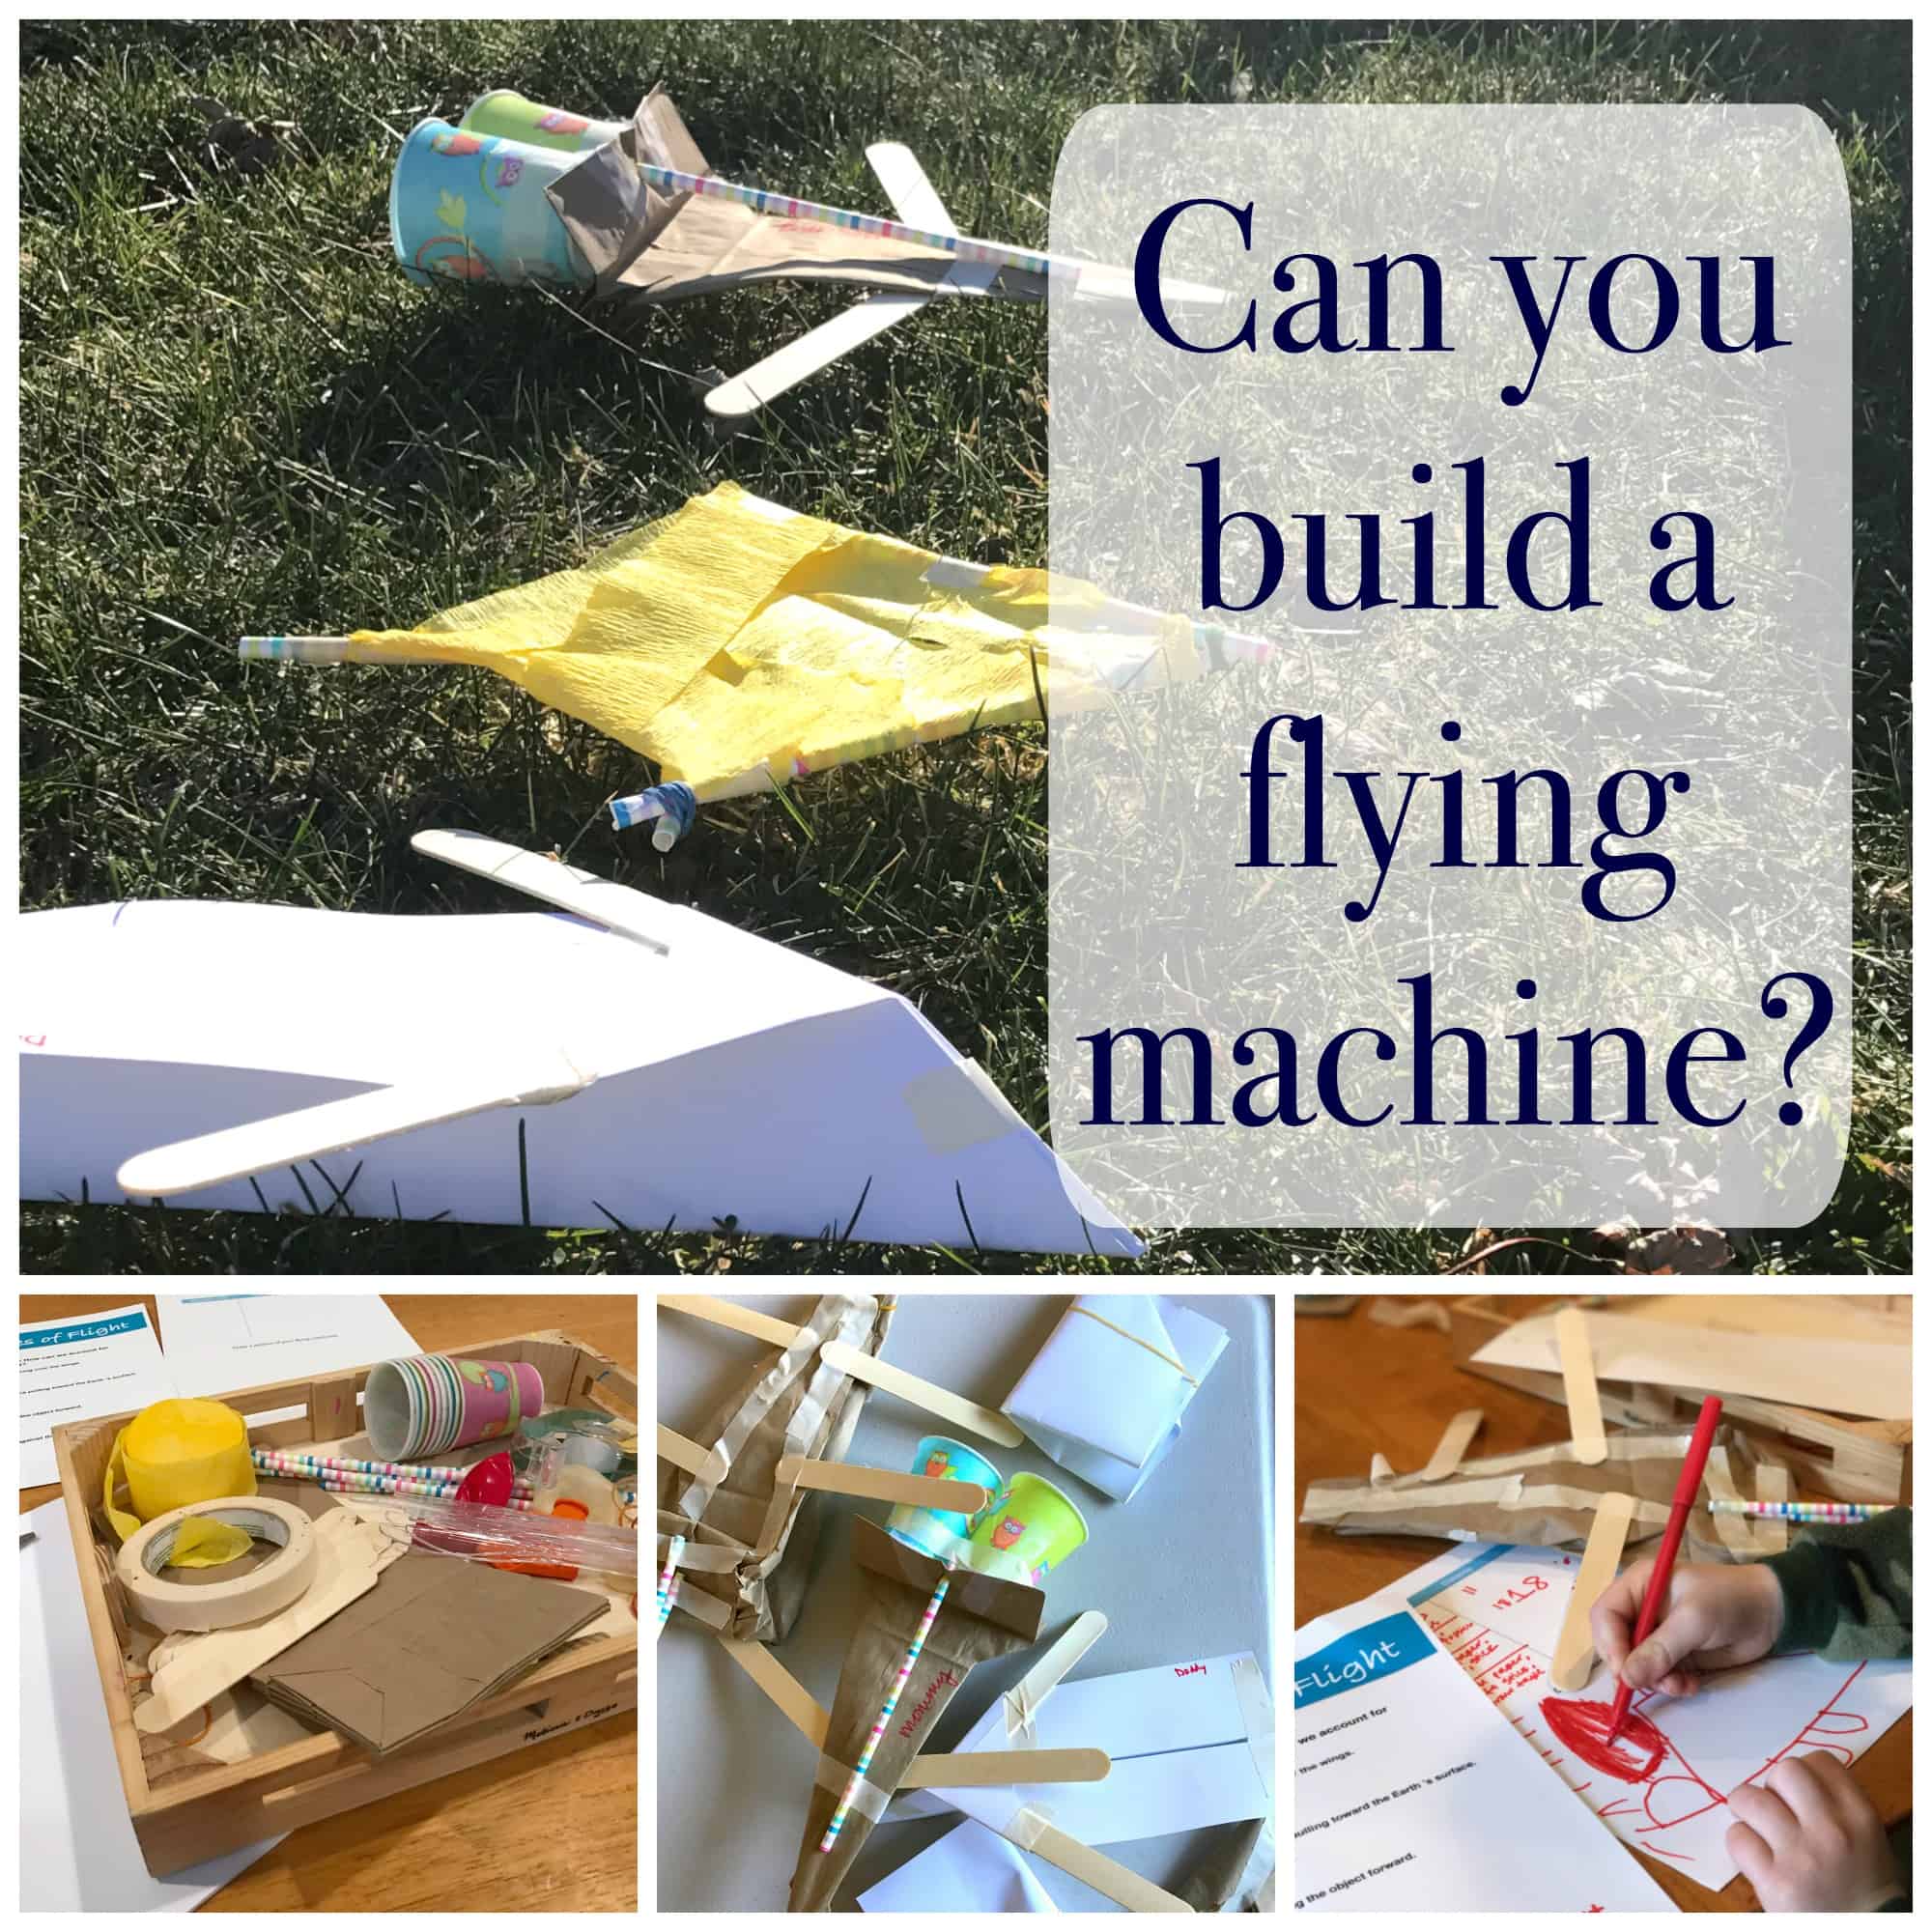 This flying machine STEM challenge is such a fun way for kids to learn about the principles of flight, plus a free printable worksheet!